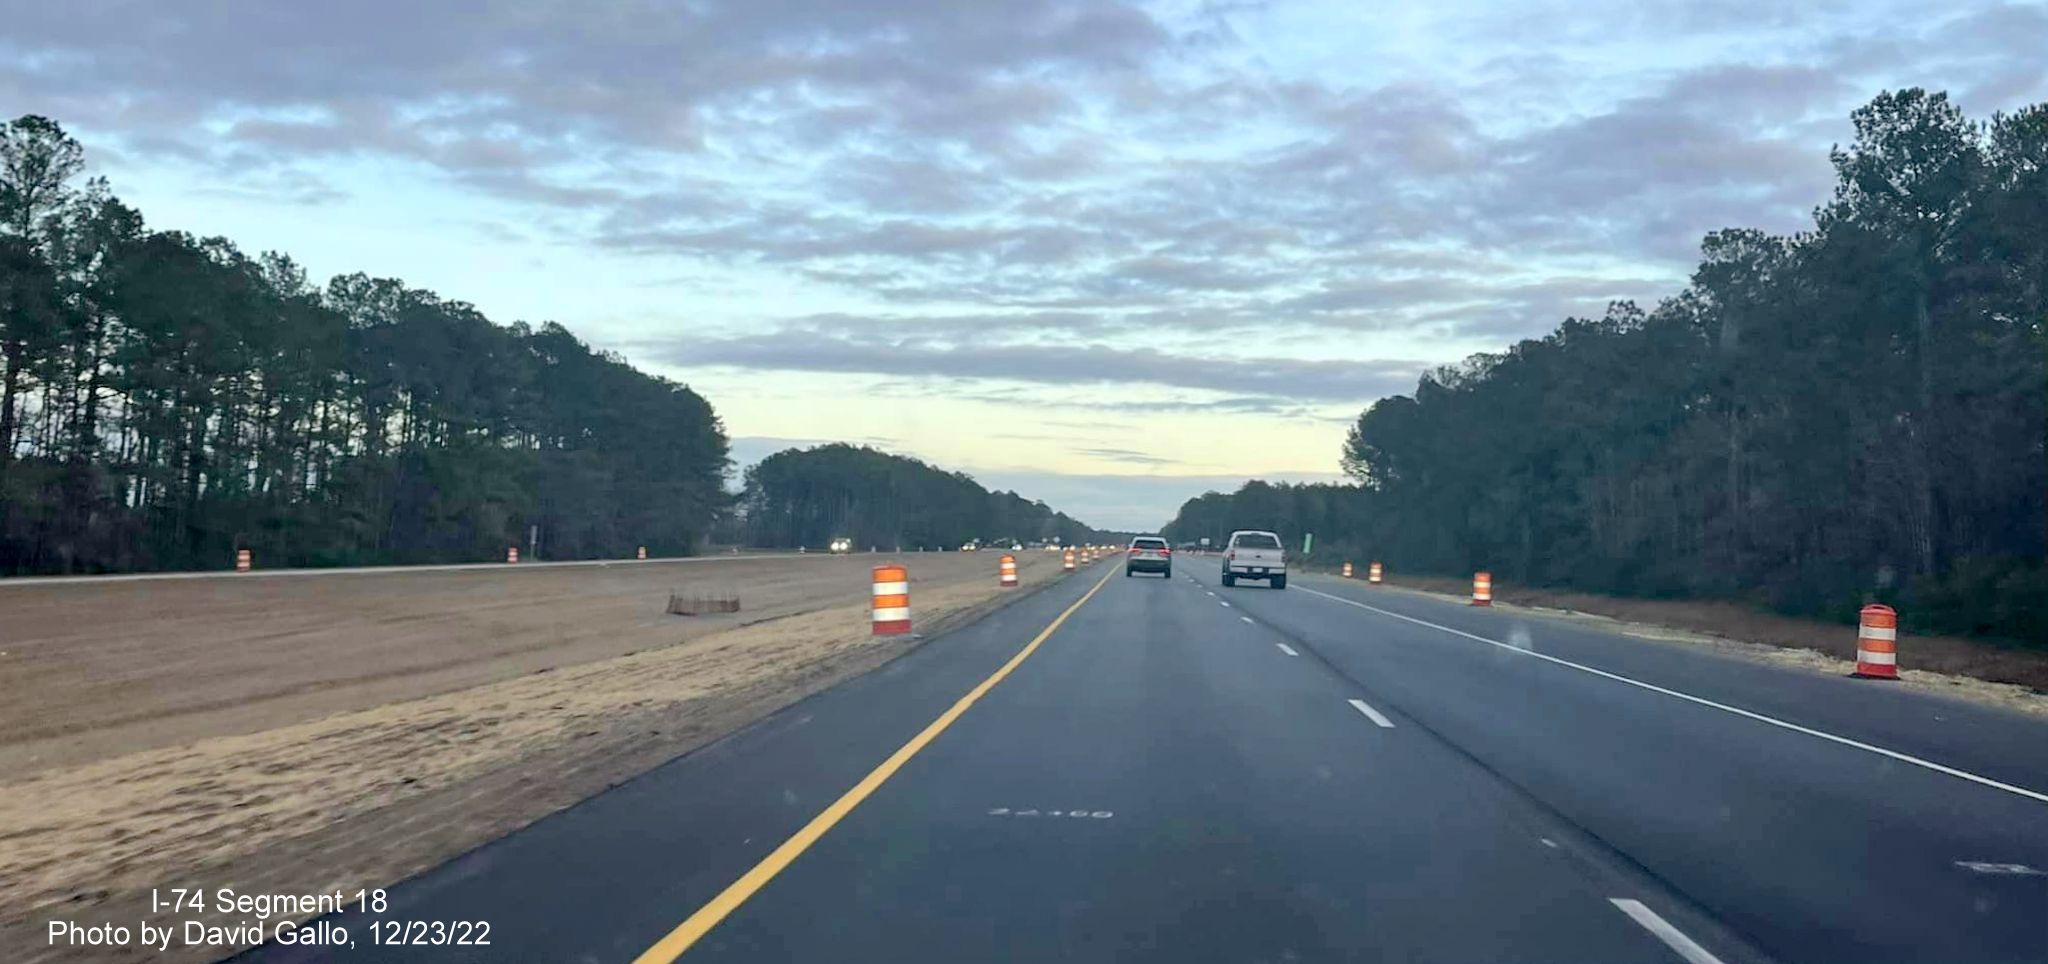 Image of graded median in Lake Waccamaw interchange work zone on US 74/76 East, by David Gallo, December 2022